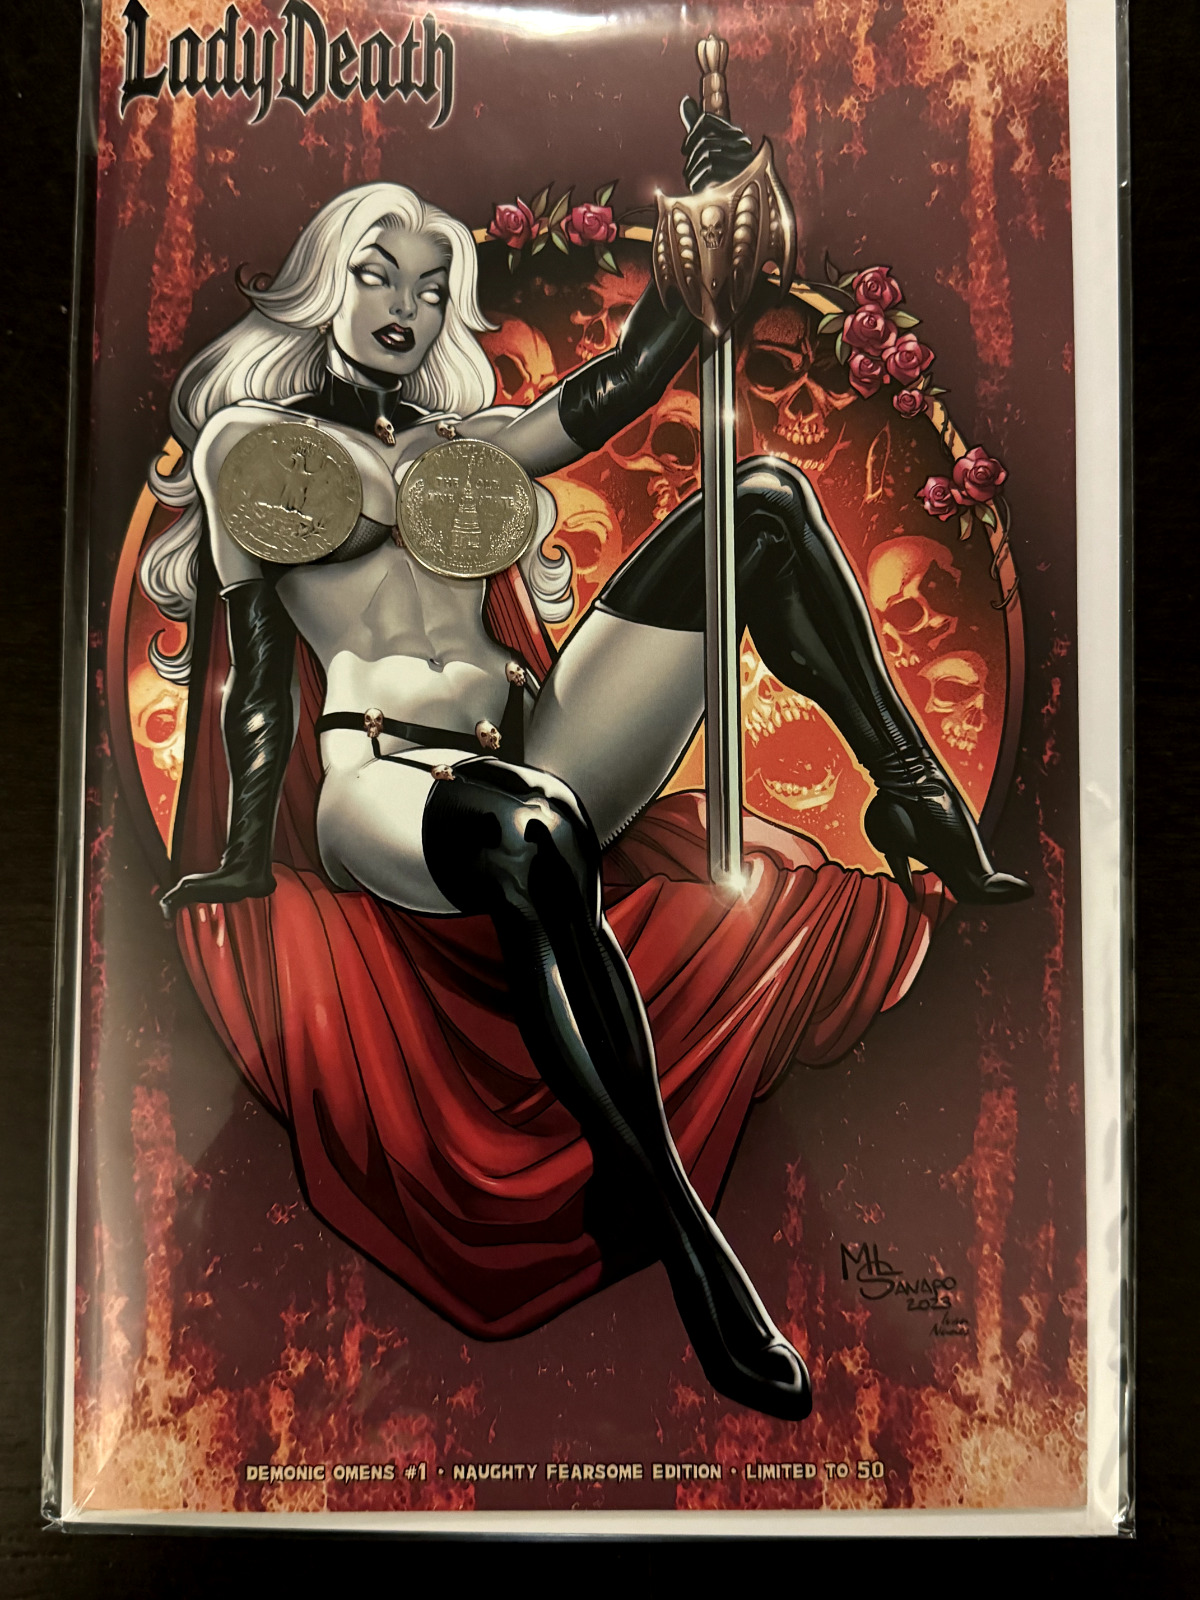 Lady Death Demonic Omens #1 Naughty Fearsome Edition Black Envelope Ltd to 50 NM